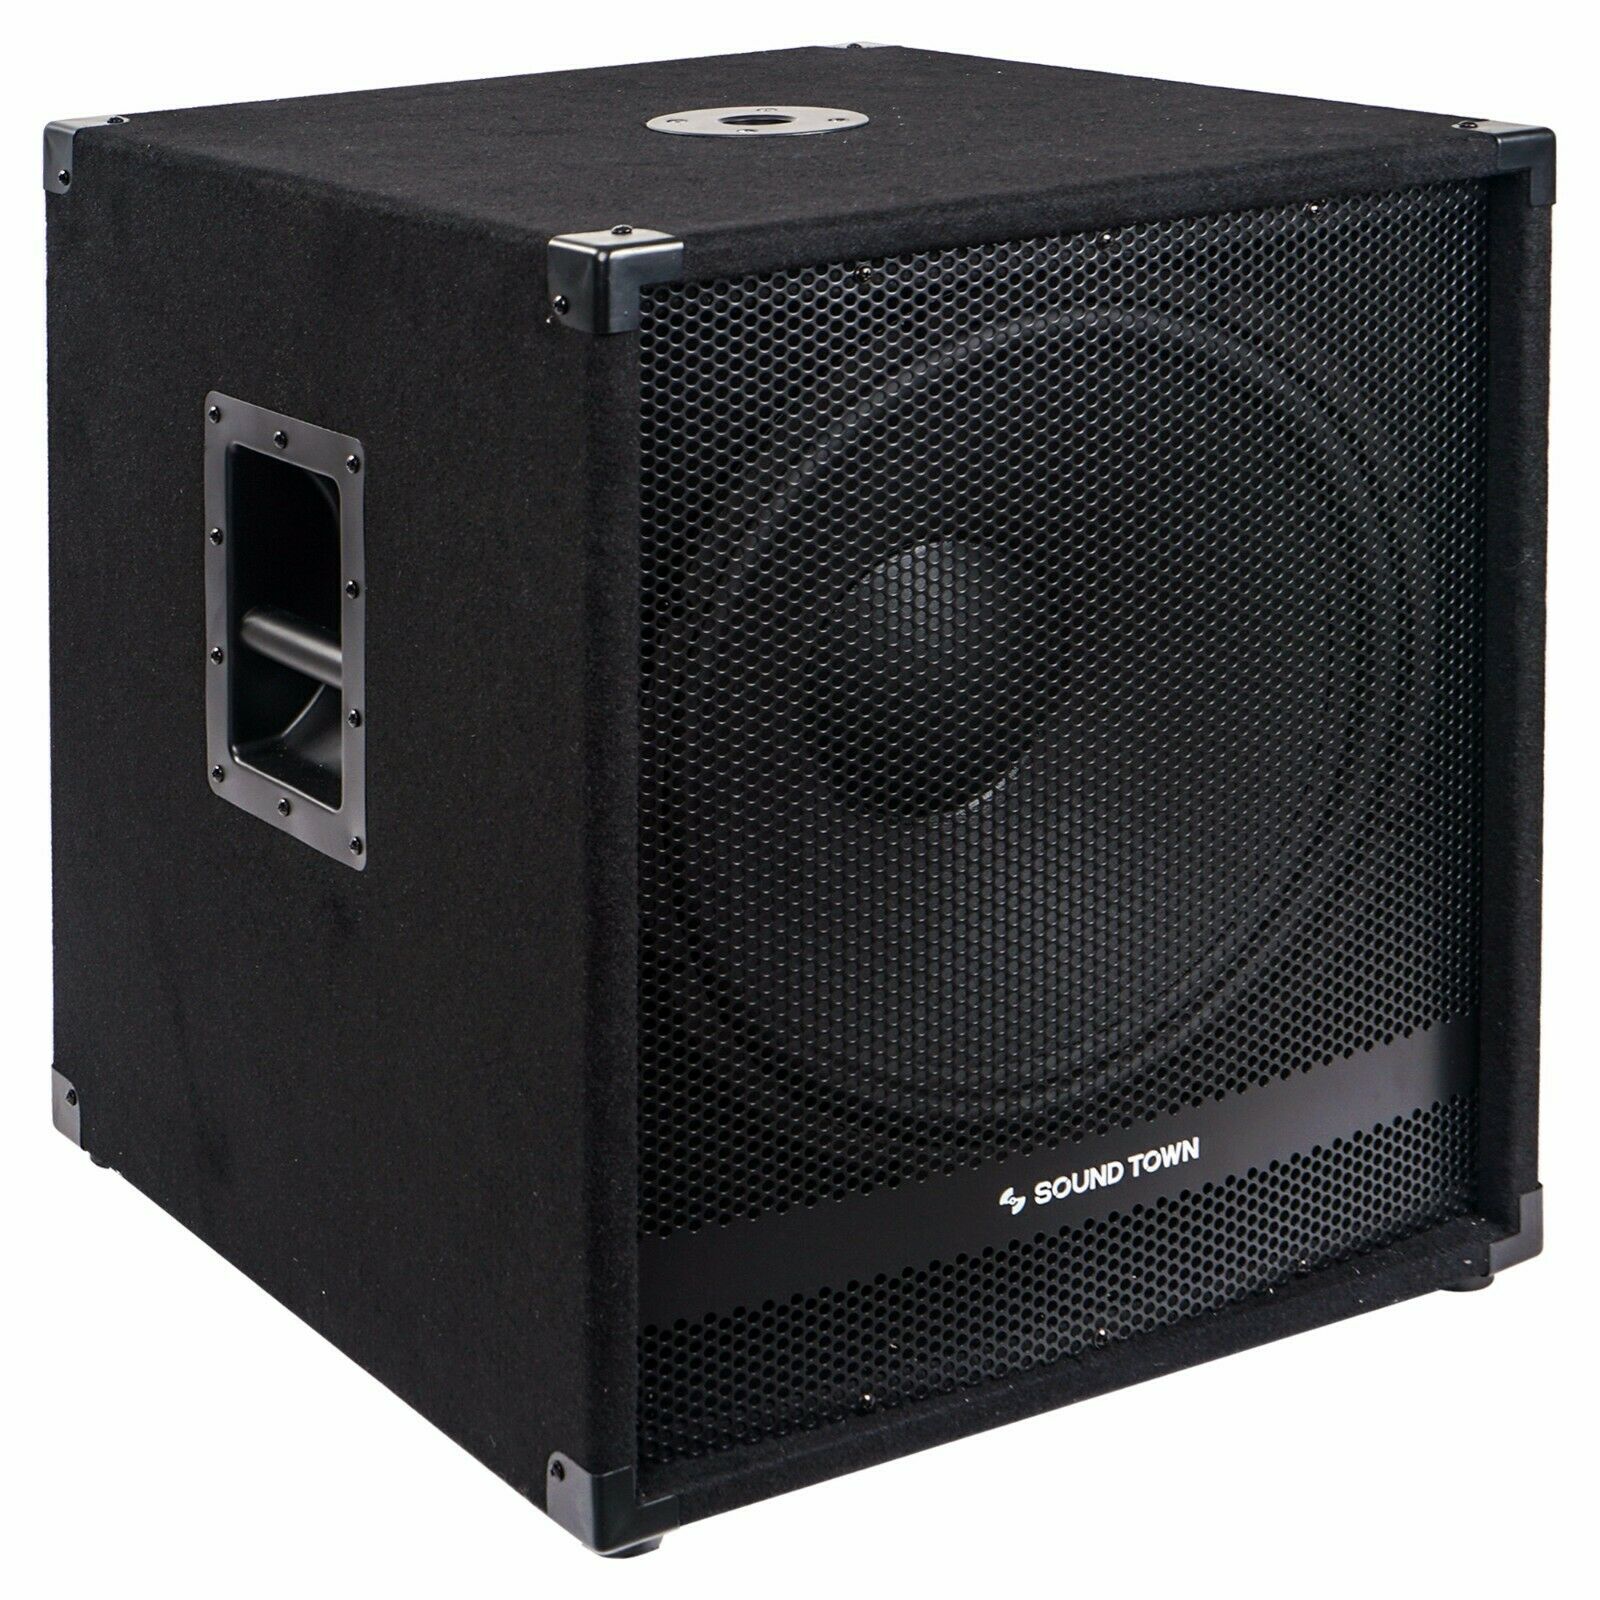 Sound Town Metis 2400w 18" Powered Subwoofer W/ Class-d Amplifier Metis-18sdpw